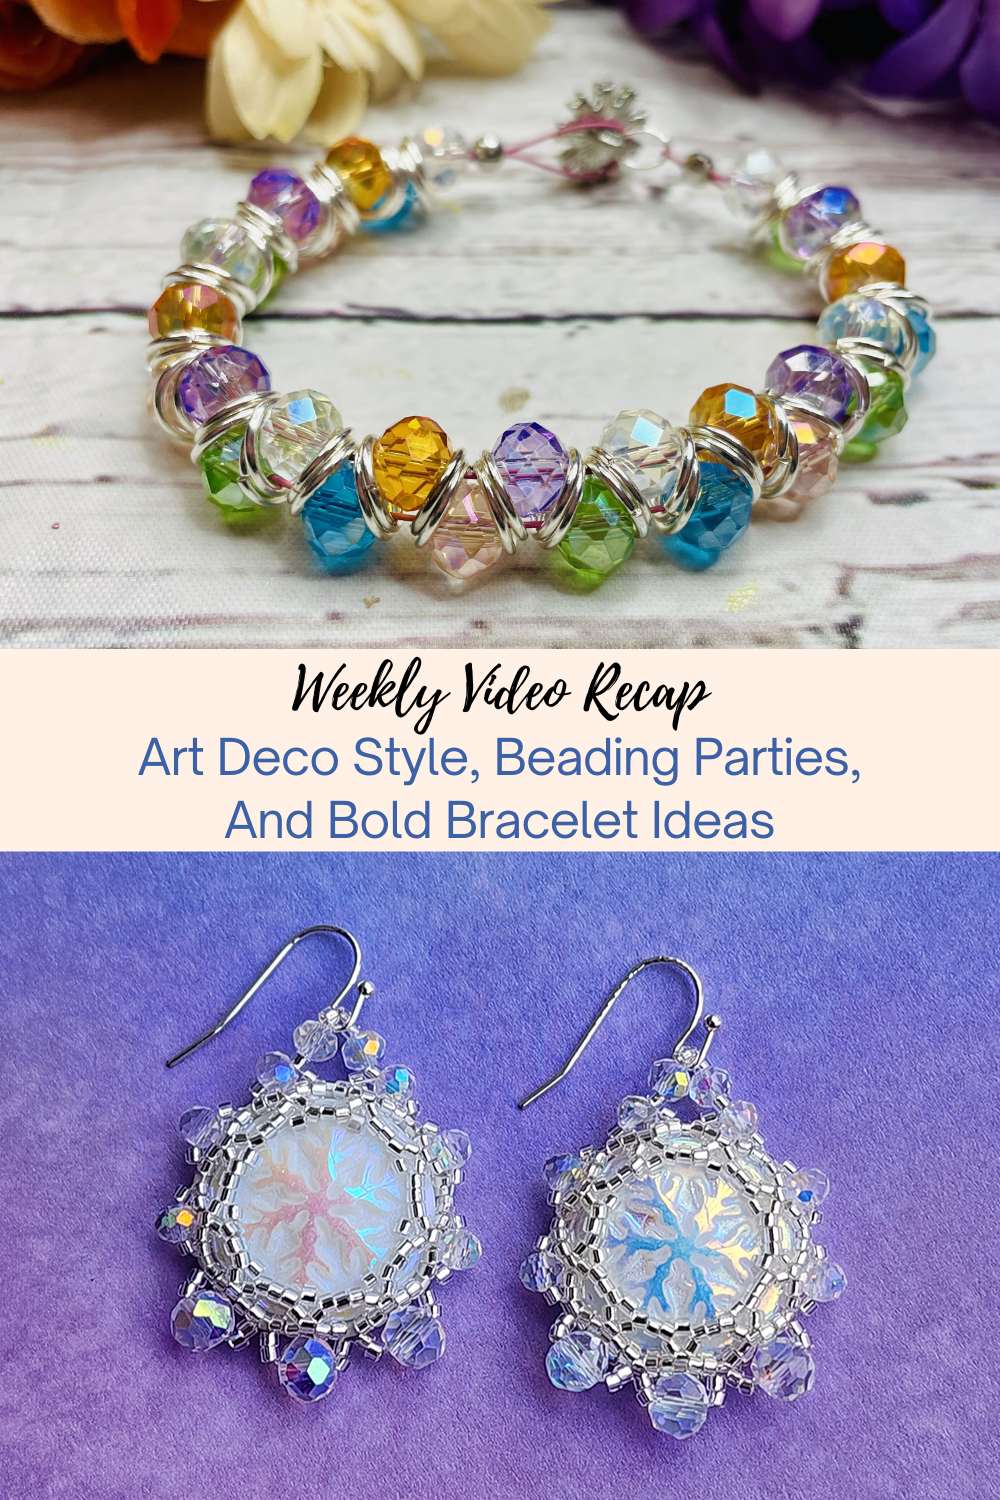 Art Deco Style, Beading Parties, And Bold Bracelet Ideas Collage